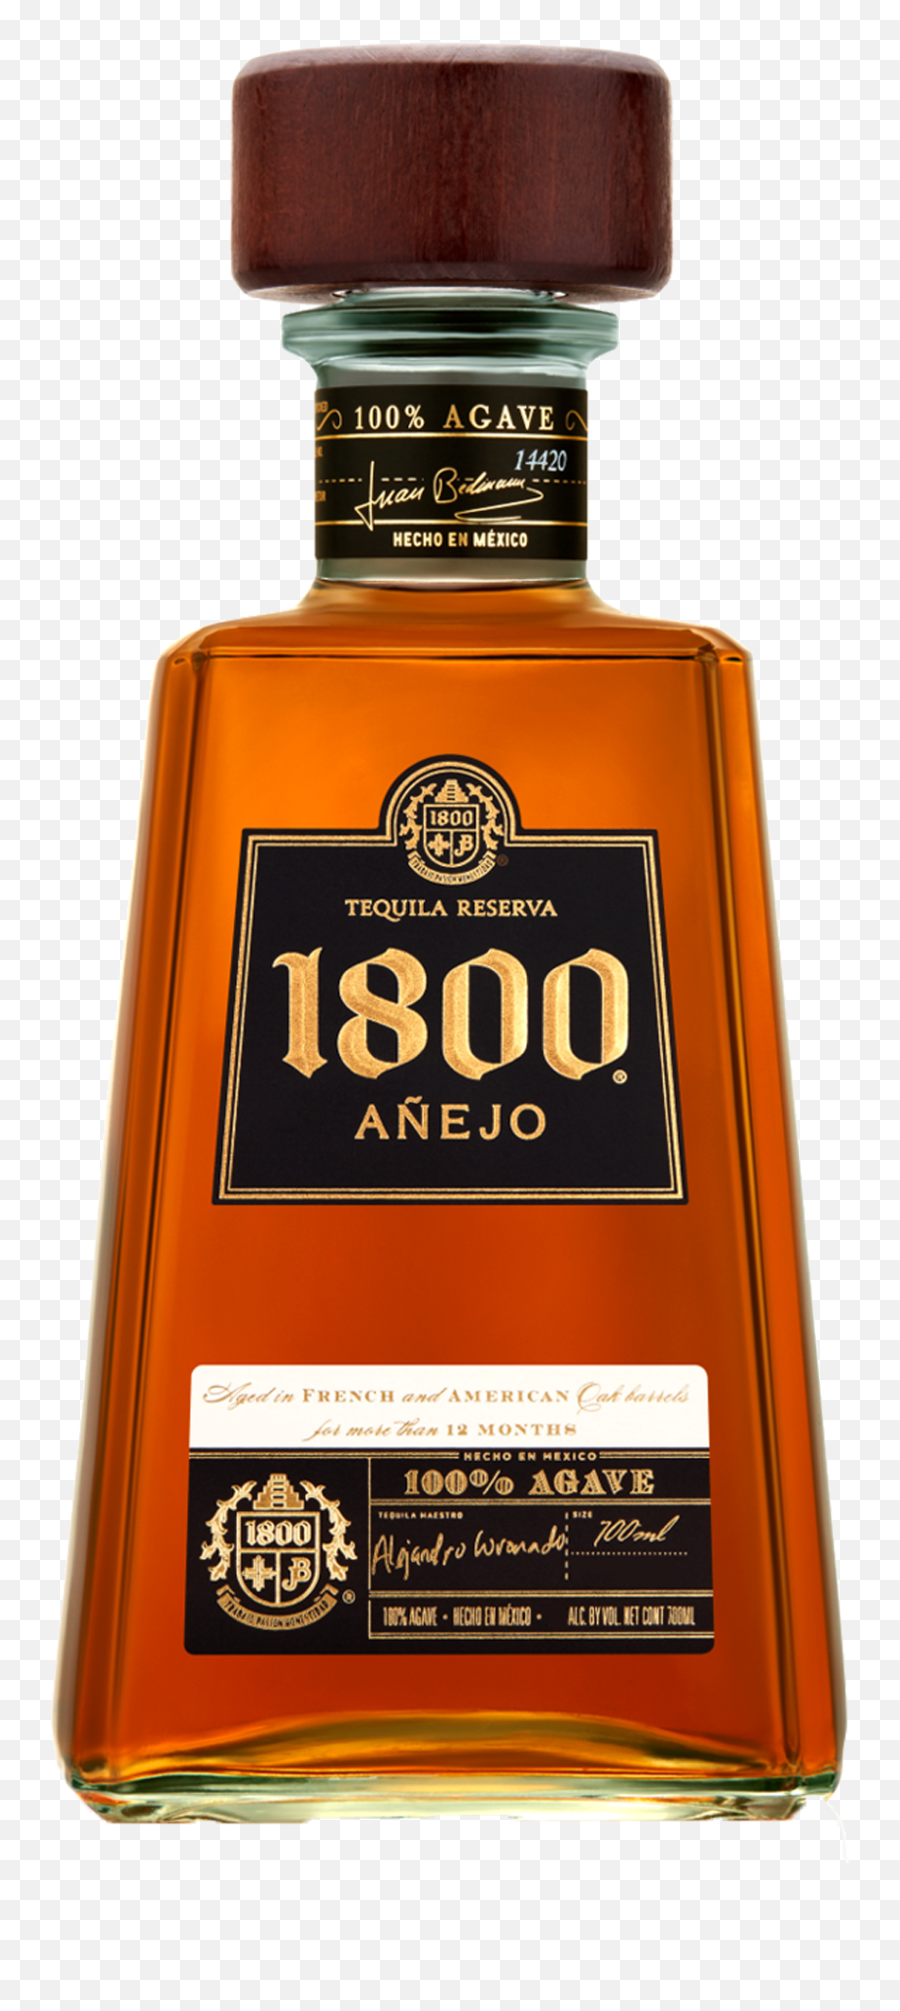 Buy 1800 Añejo Tequila 700ml Online - 1800 Anejo Tequila Png,Tequila Png